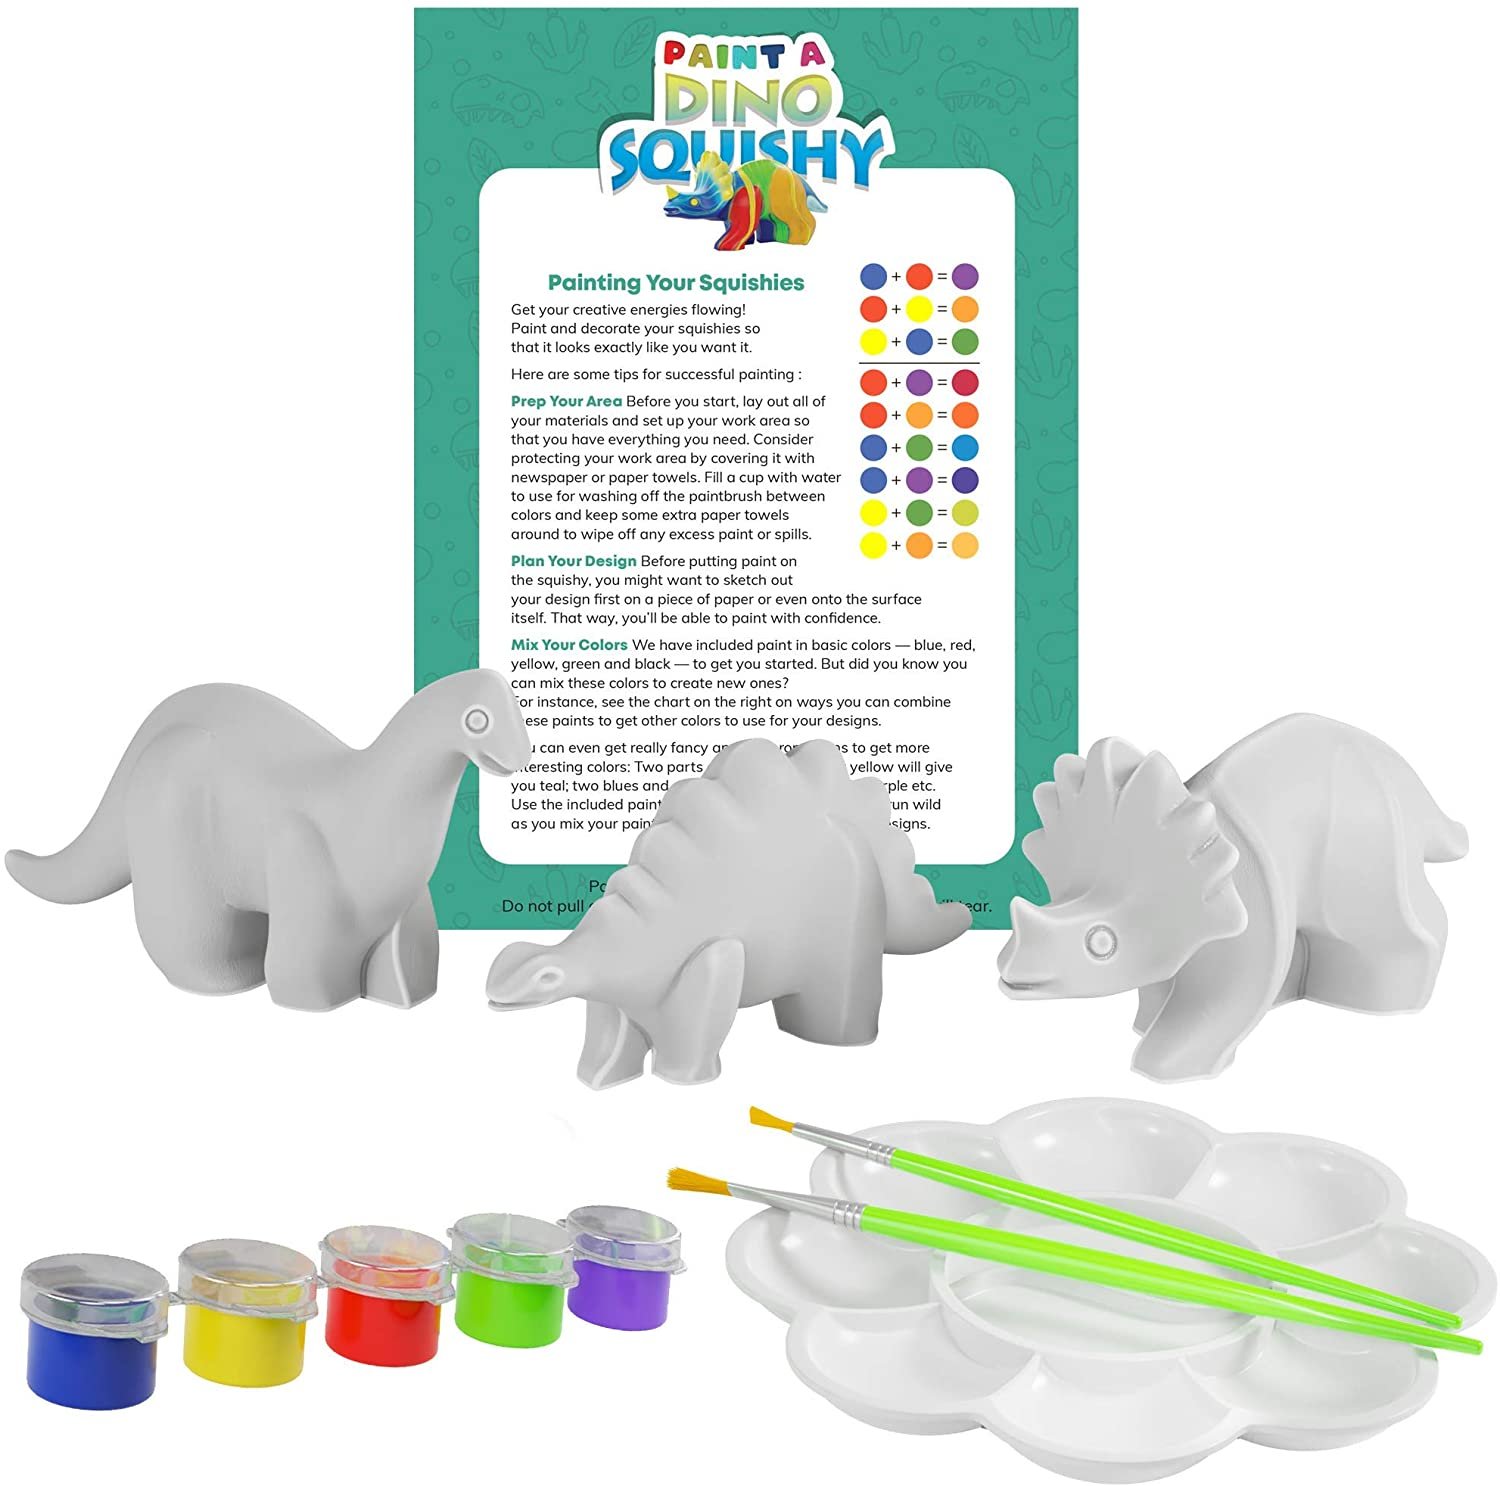 Paint 3 Large Dino Squishies - Paint a Squishy Kit - Make Your Own Squishies with Puffy Paint - Arts and Crafts Gifts for Kids, Boys & Girls - DIY Squishy Makeovers Painting Kit, Dinosaur Toys - image 2 of 8